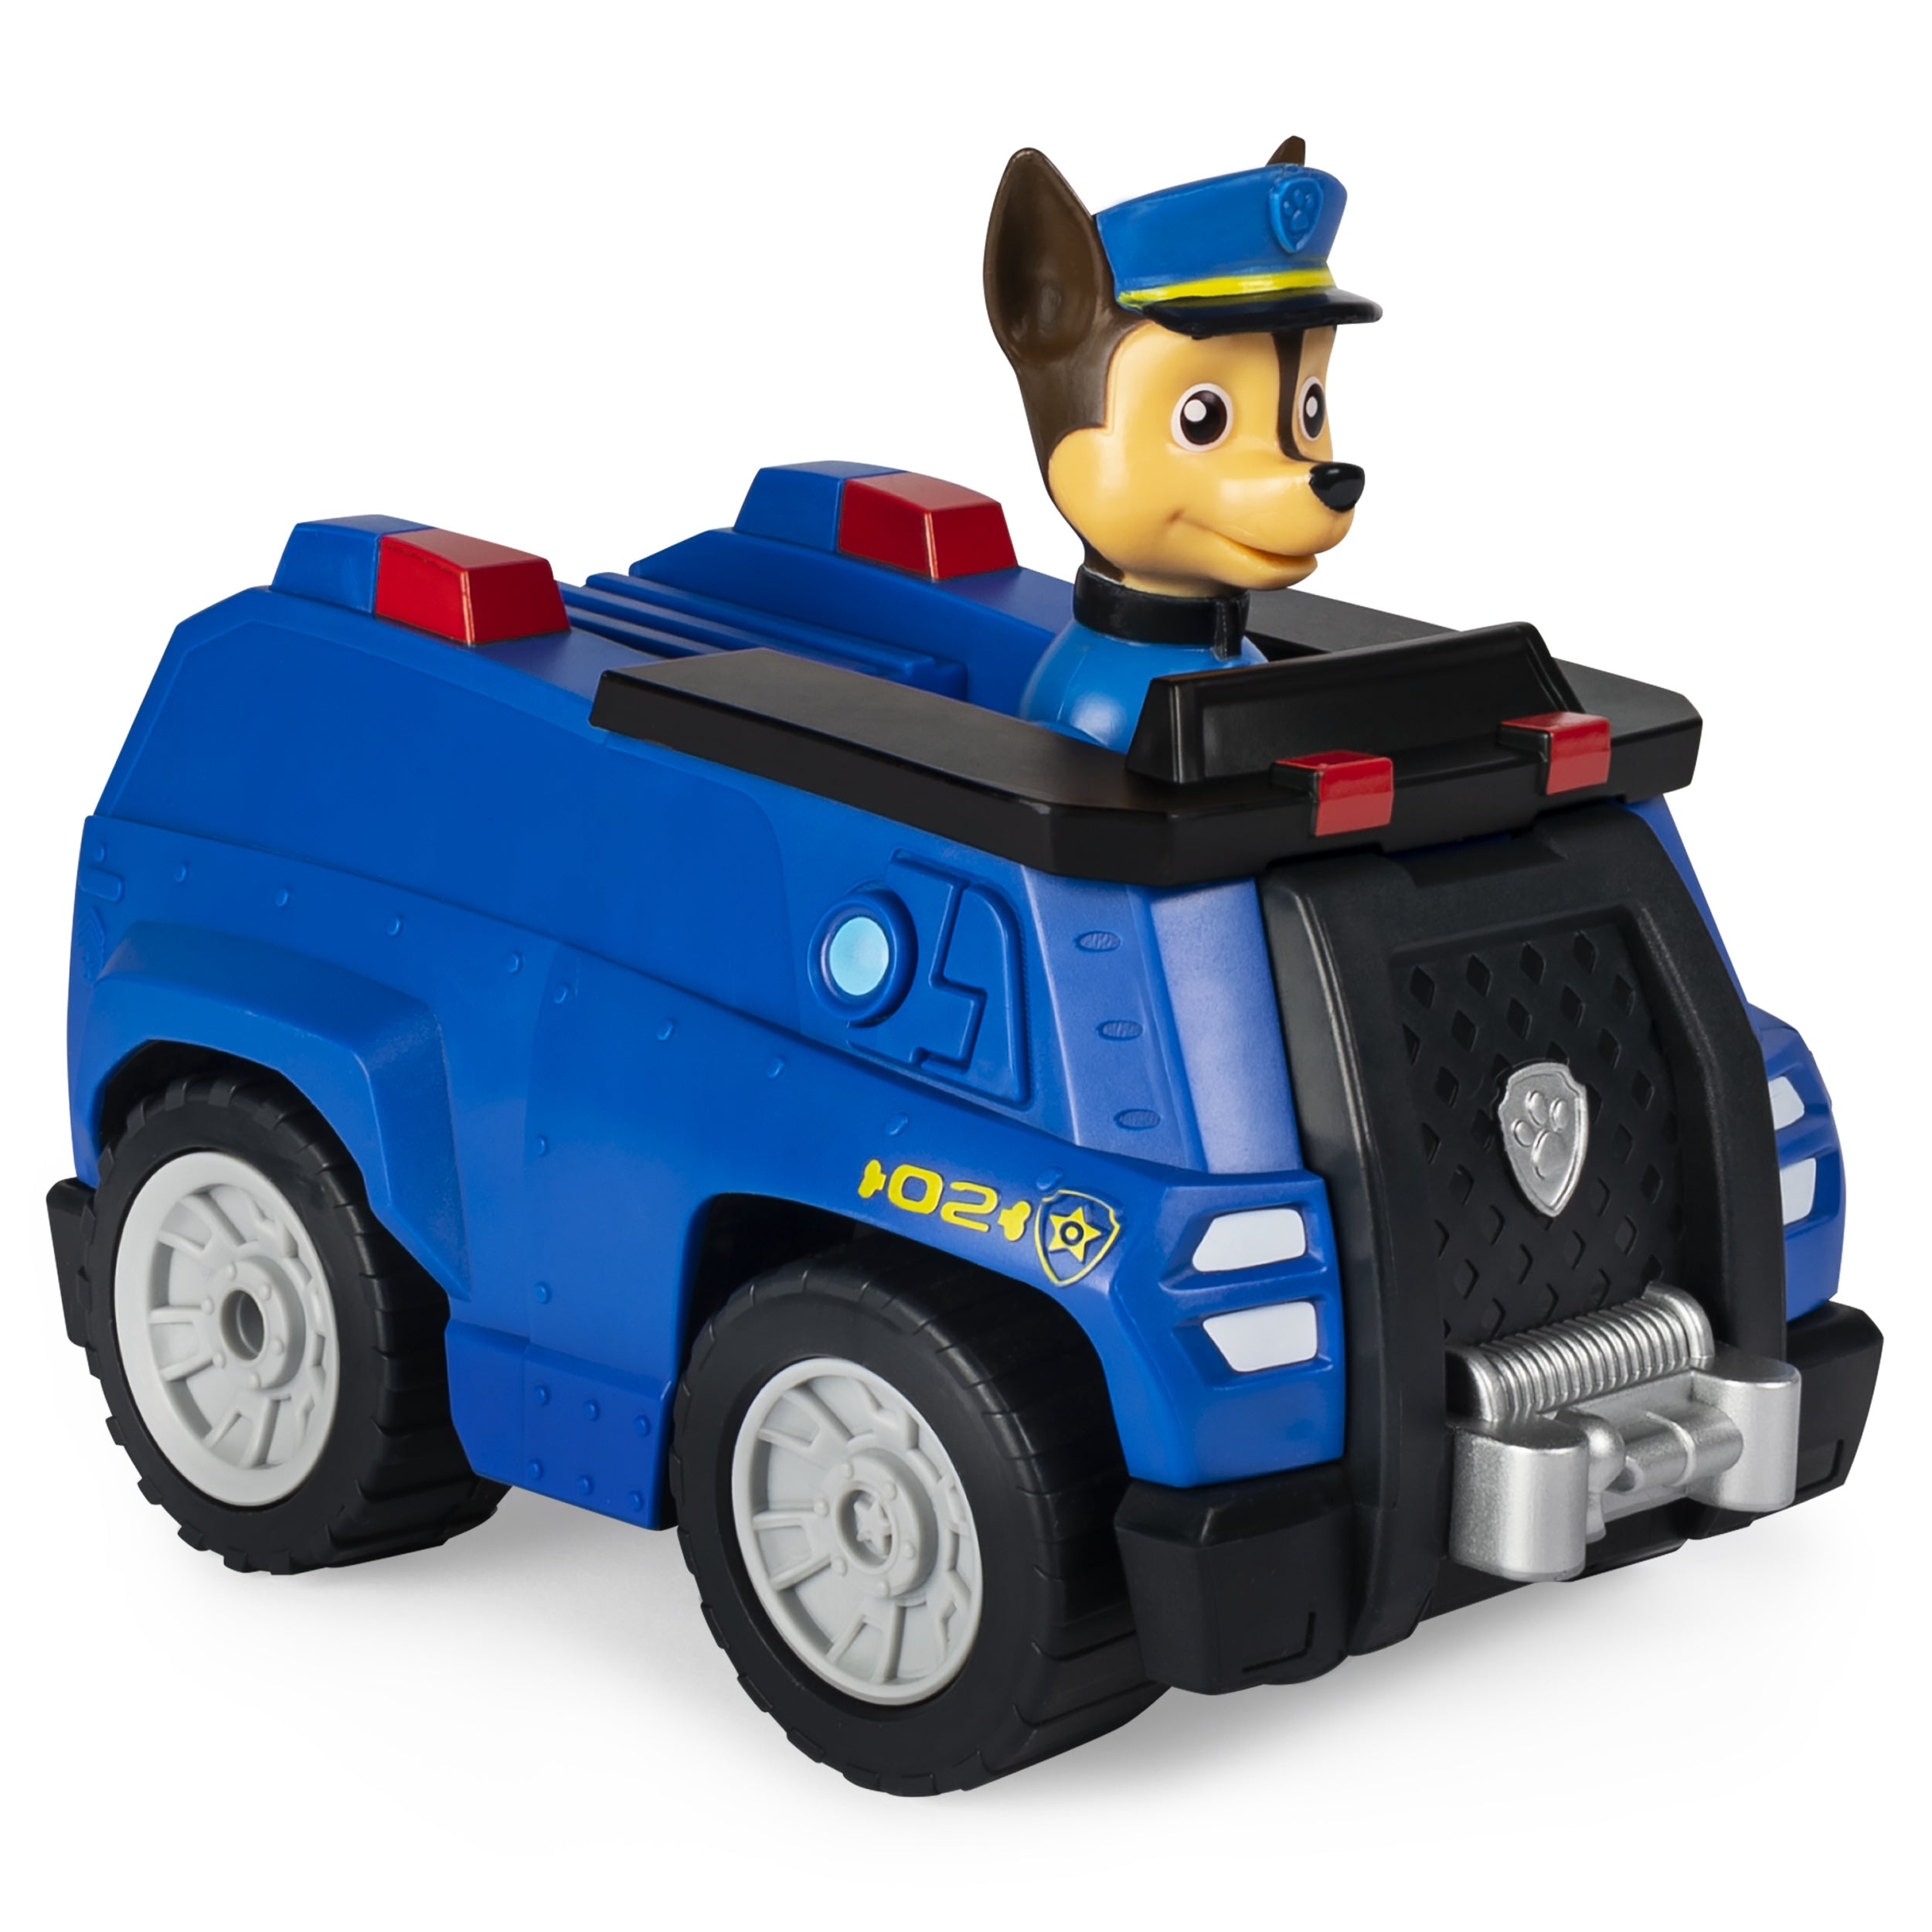 Spin Master - PAW Patrol , Chase Remote Control Police Cruiser with 2-Way Steering, for Kids Aged 3 and Up